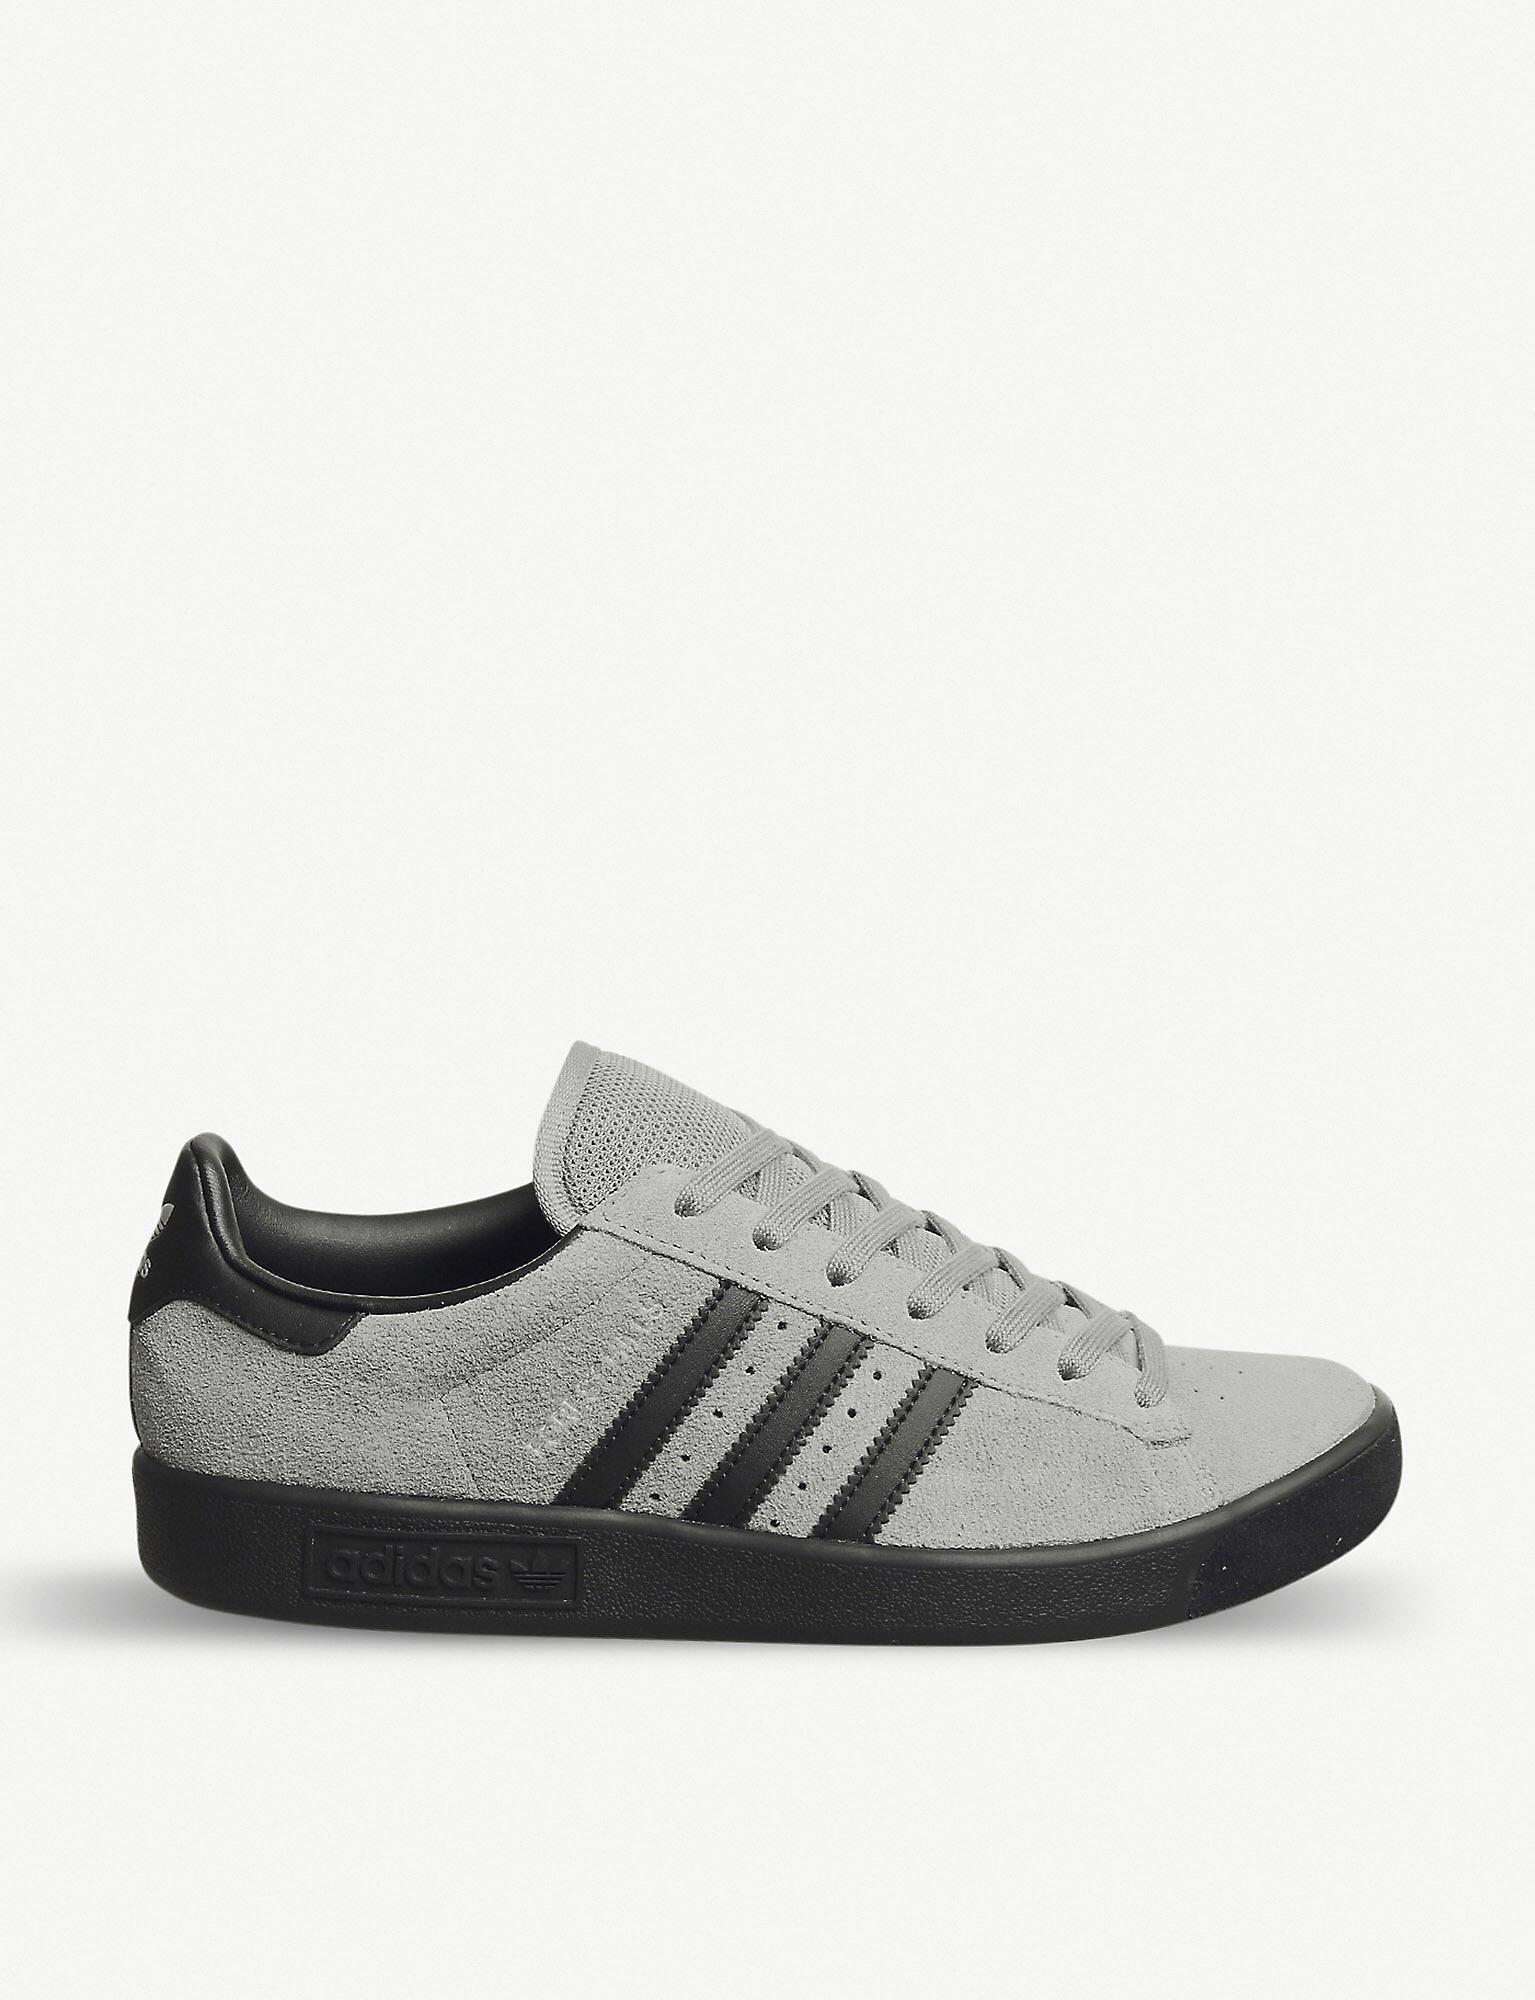 adidas Forest Hills Suede Trainers in Gray for Men - Lyst